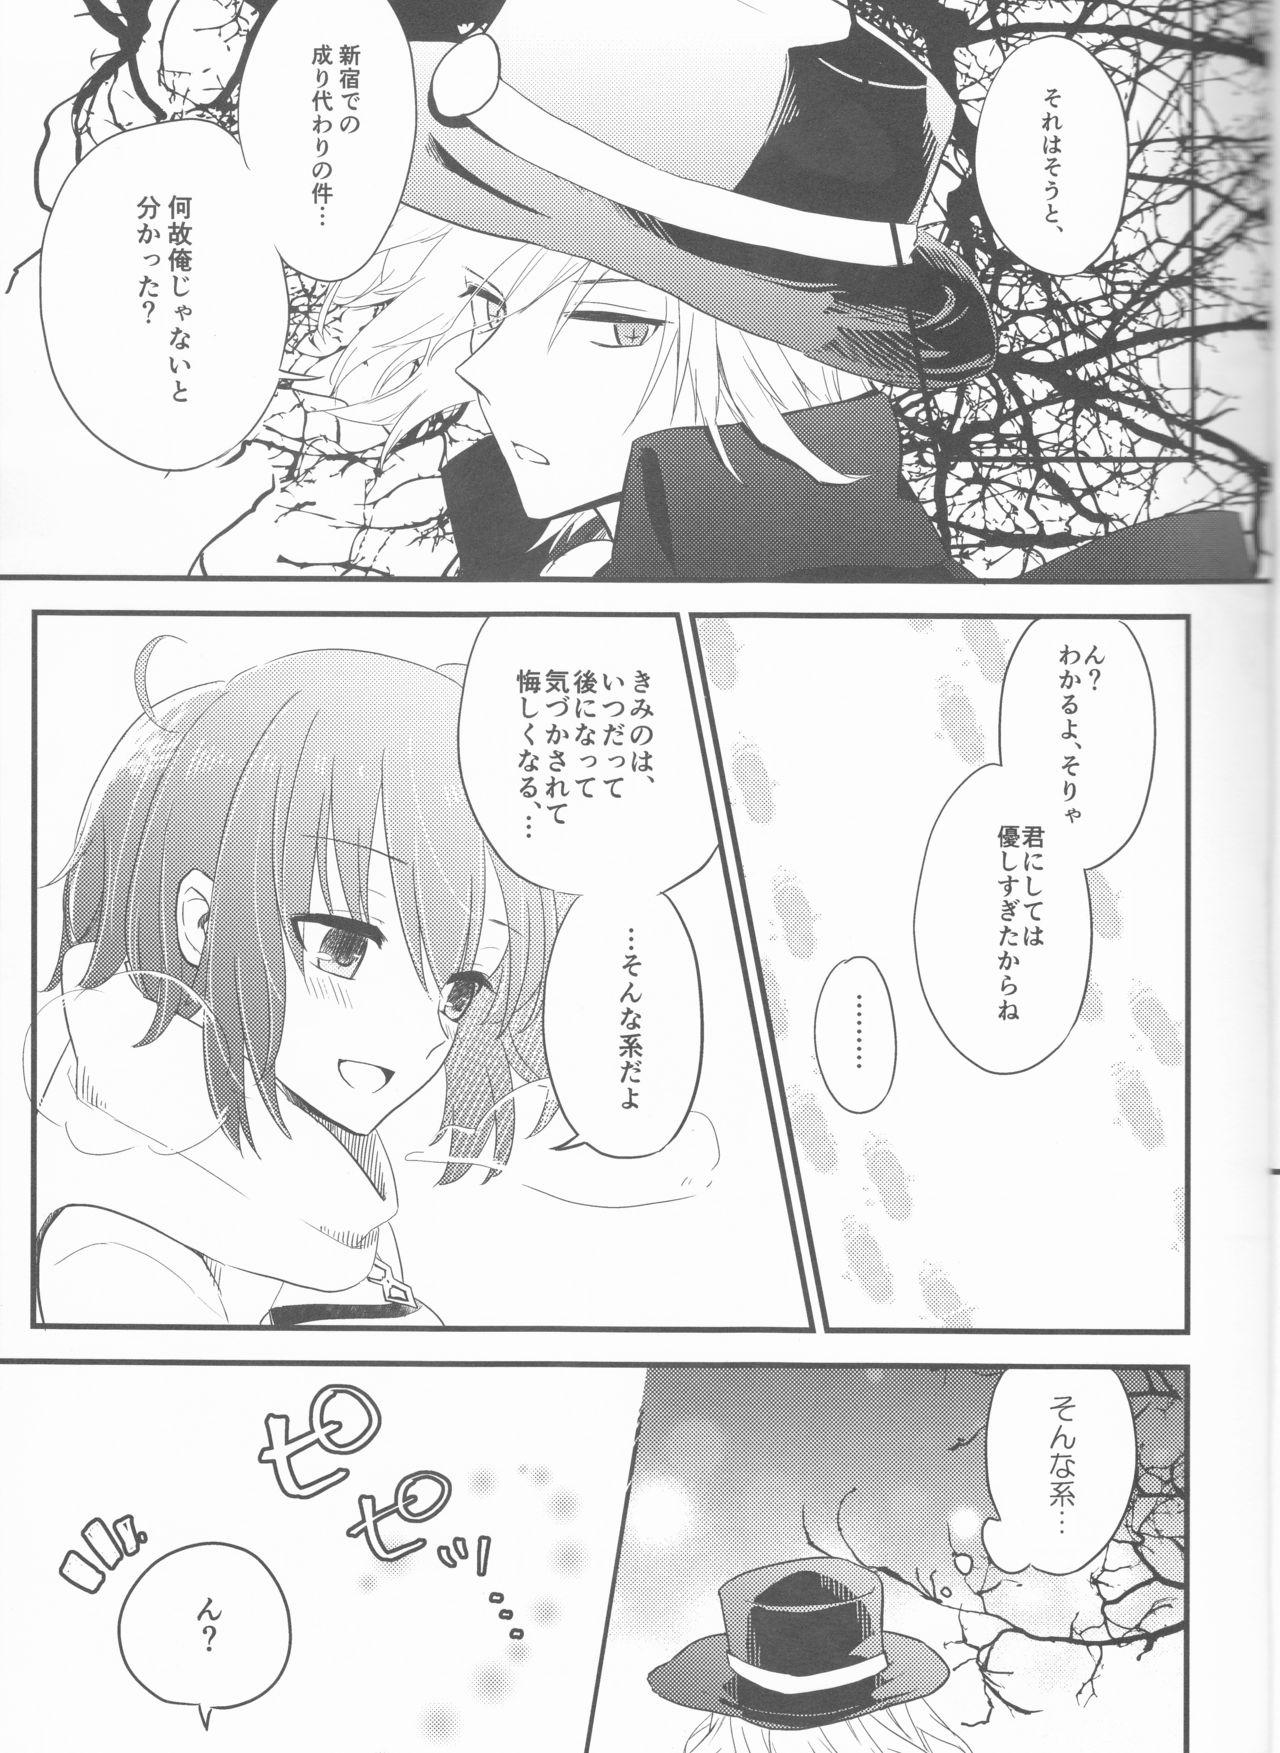 Homo Yume no Ondo - Warmth of the dream - Fate grand order Best Blow Job - Page 7